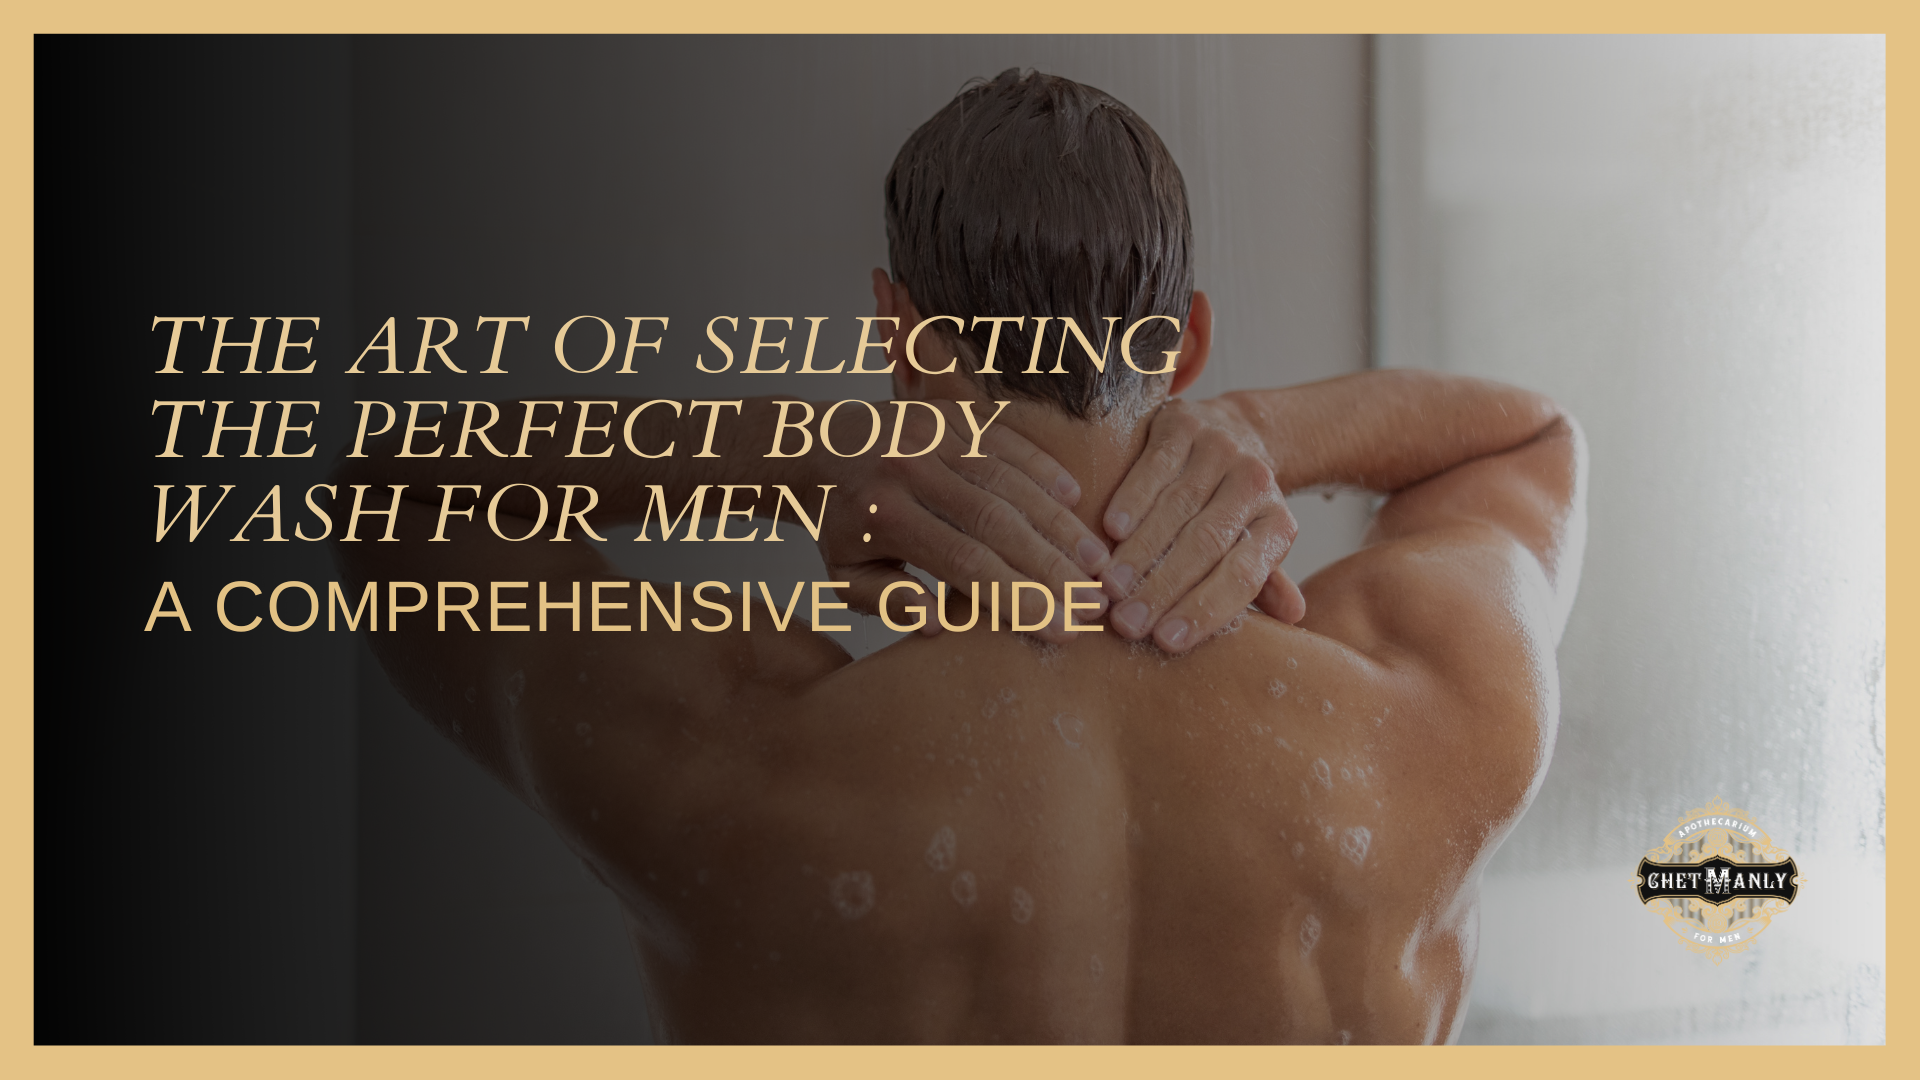 The Art of Selecting the Perfect Body Wash for Men: A Comprehensive Guide